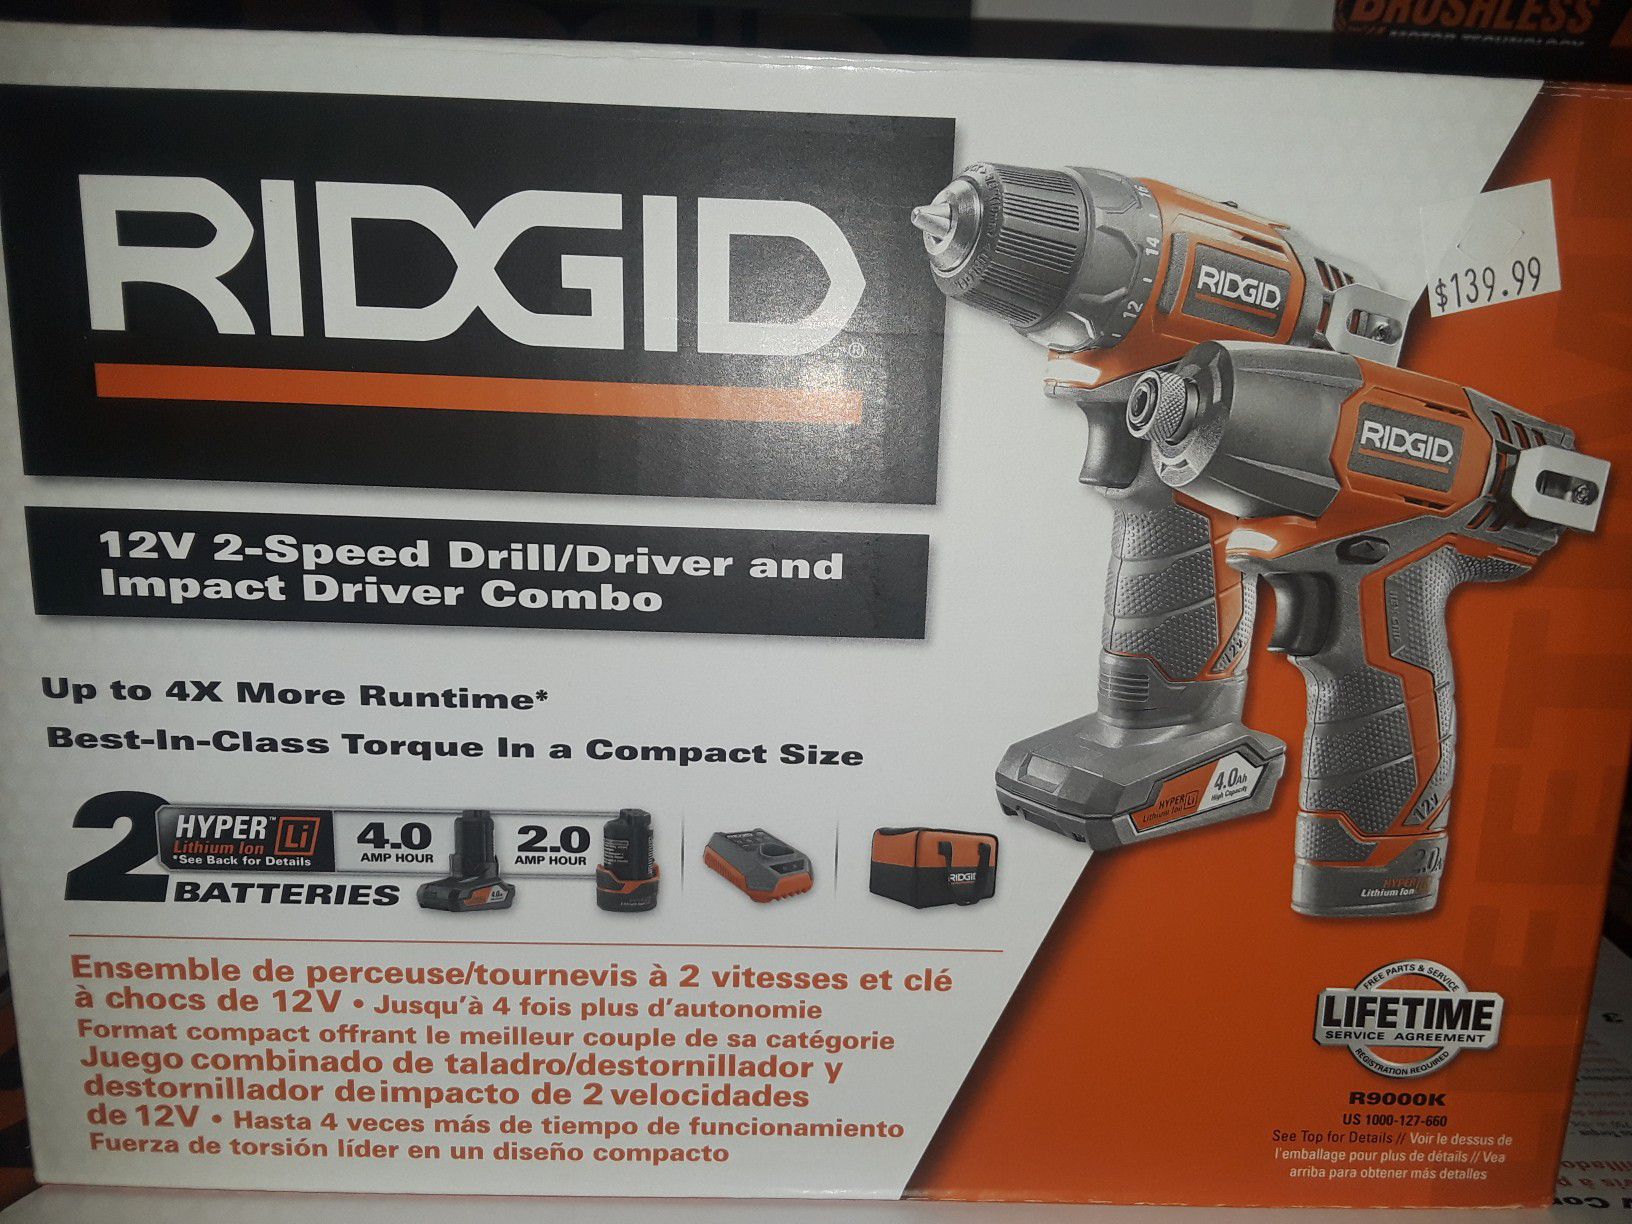 12 v 2-speed drill/driver and impact driver combo